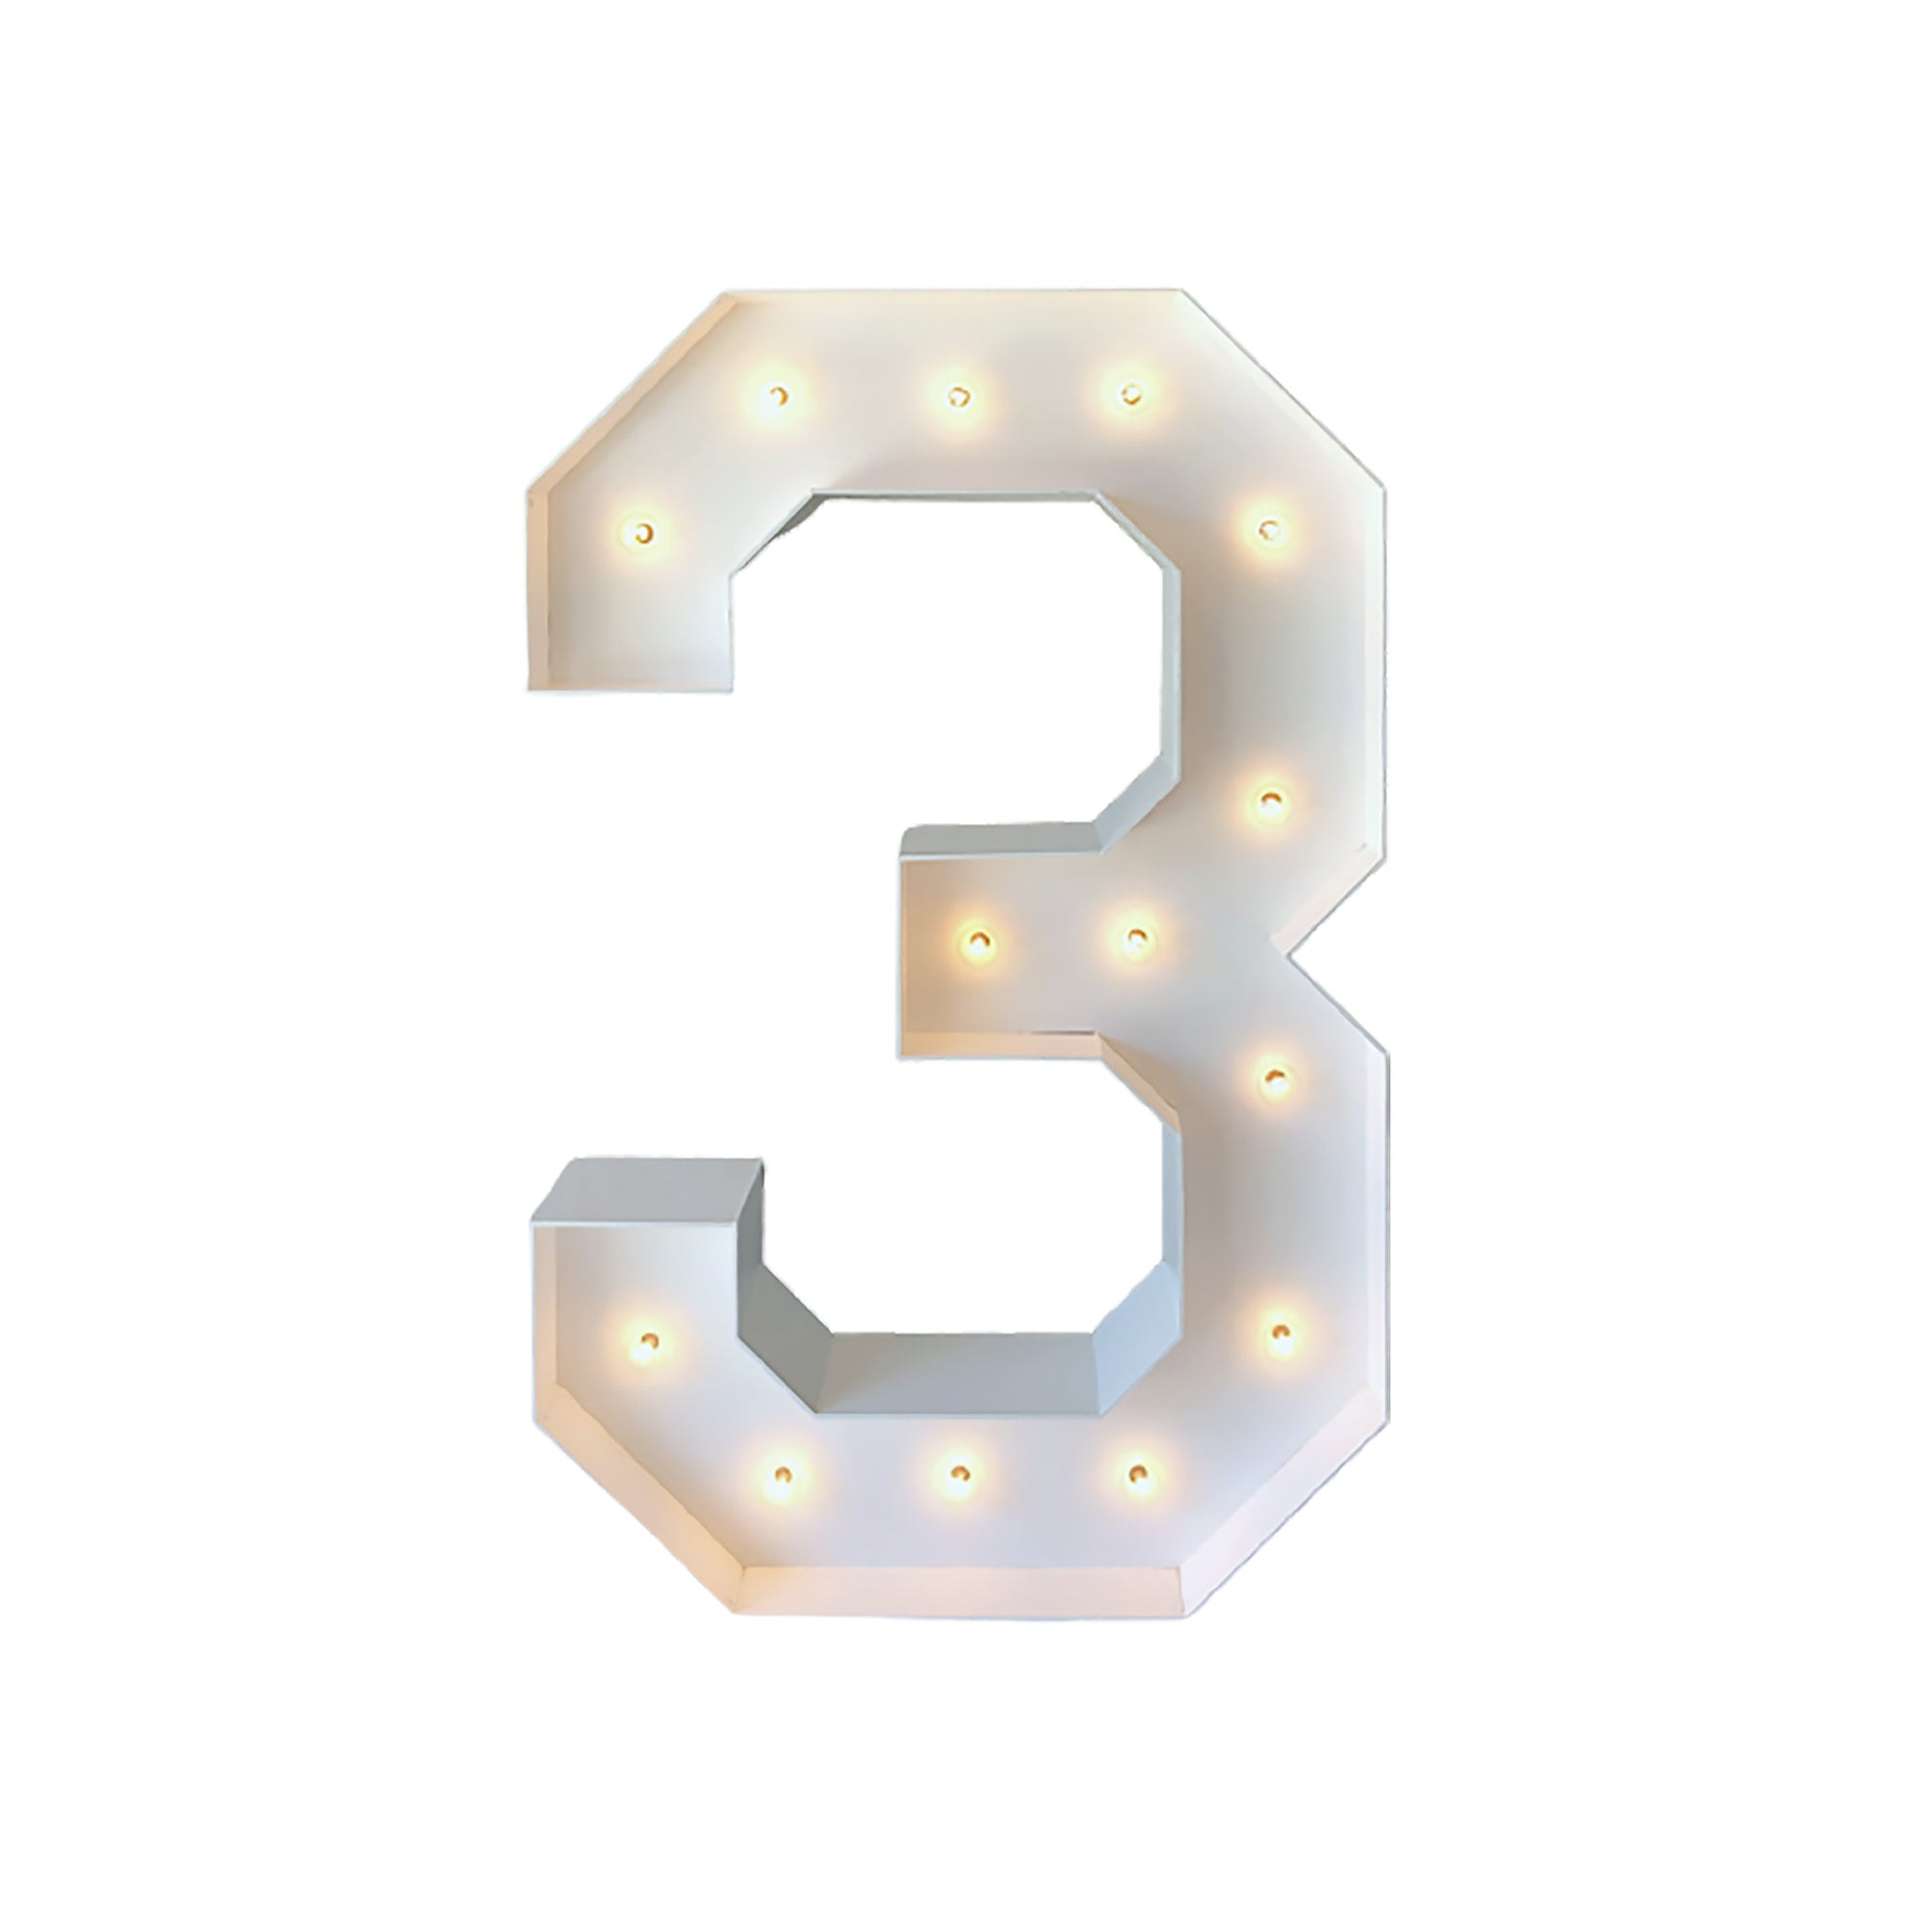 Marquee number with LED